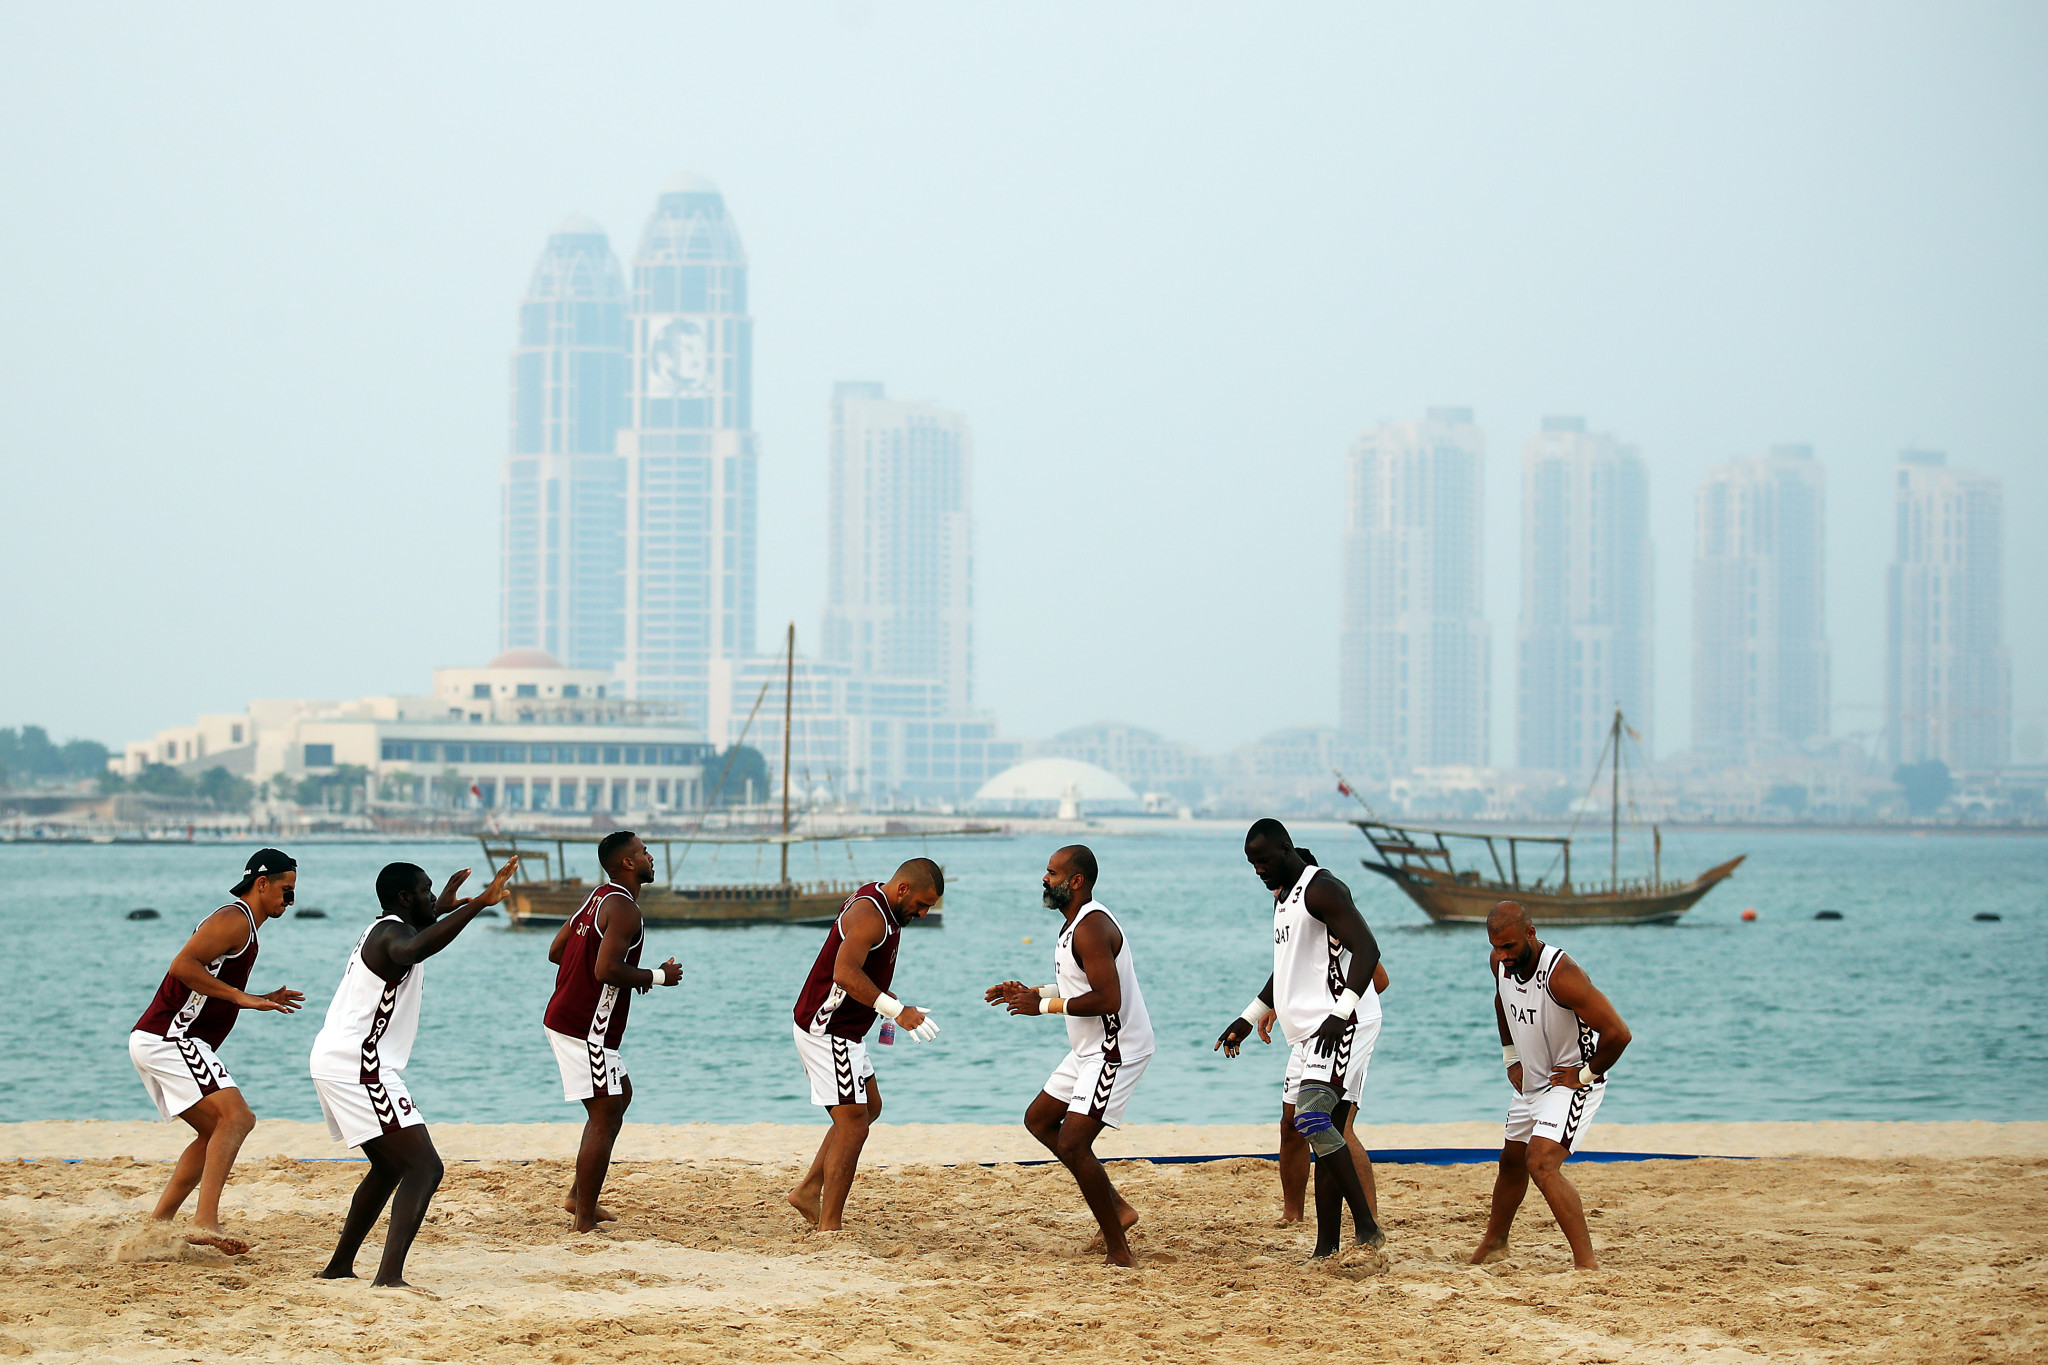 Doha held the inaugural edition of the ANOC World Beach Games in 2019 ©Getty Images